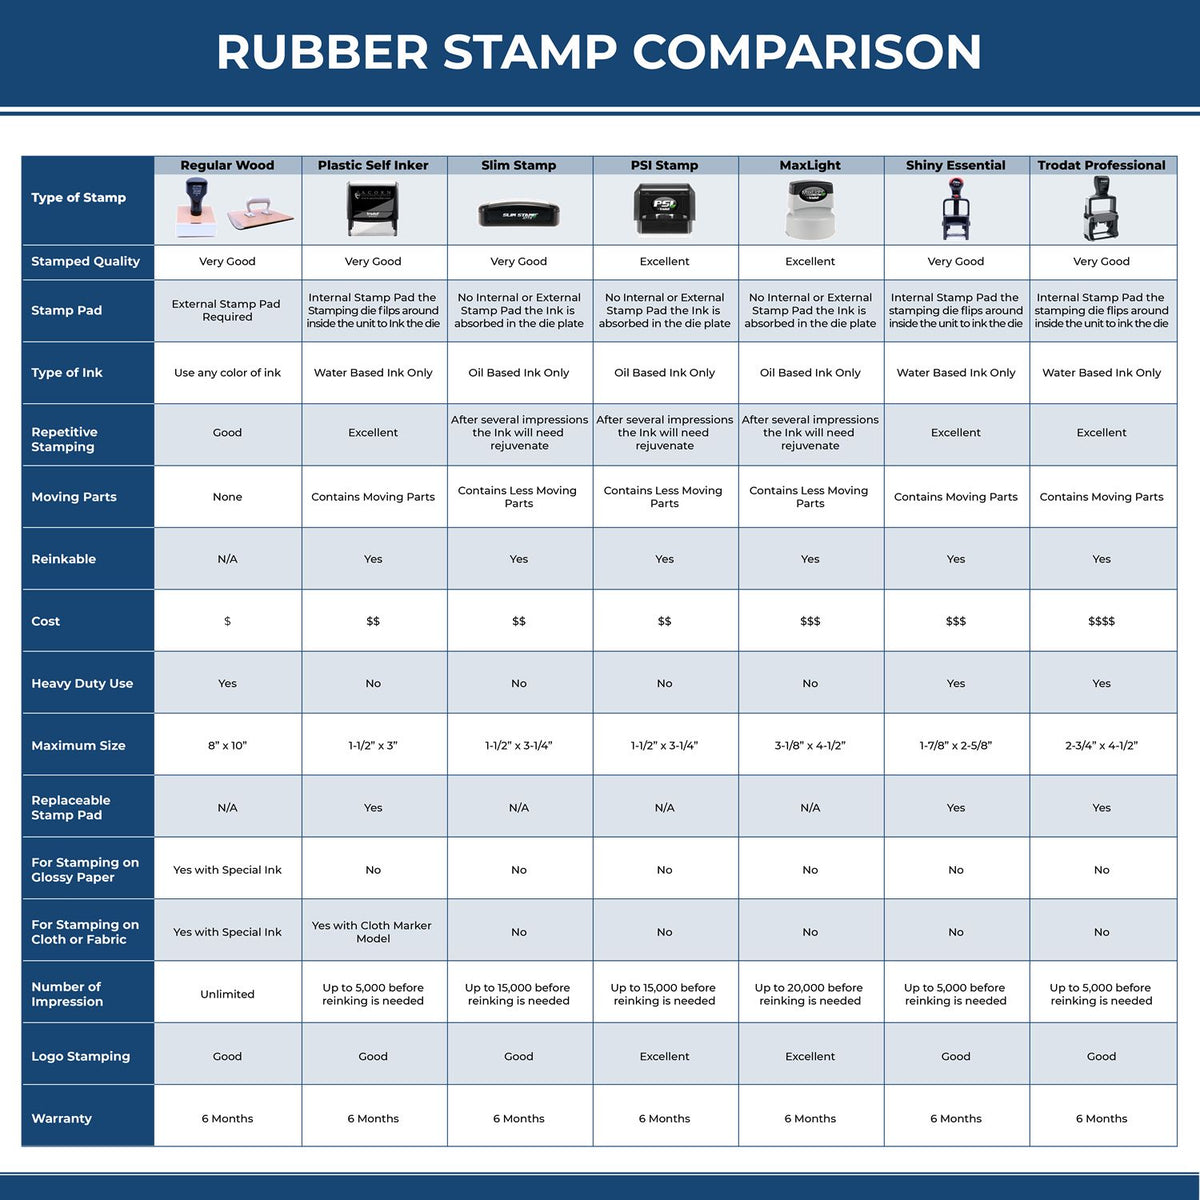 A comparison chart for the different types of mount models available for the Self-Inking Alabama PE Stamp.